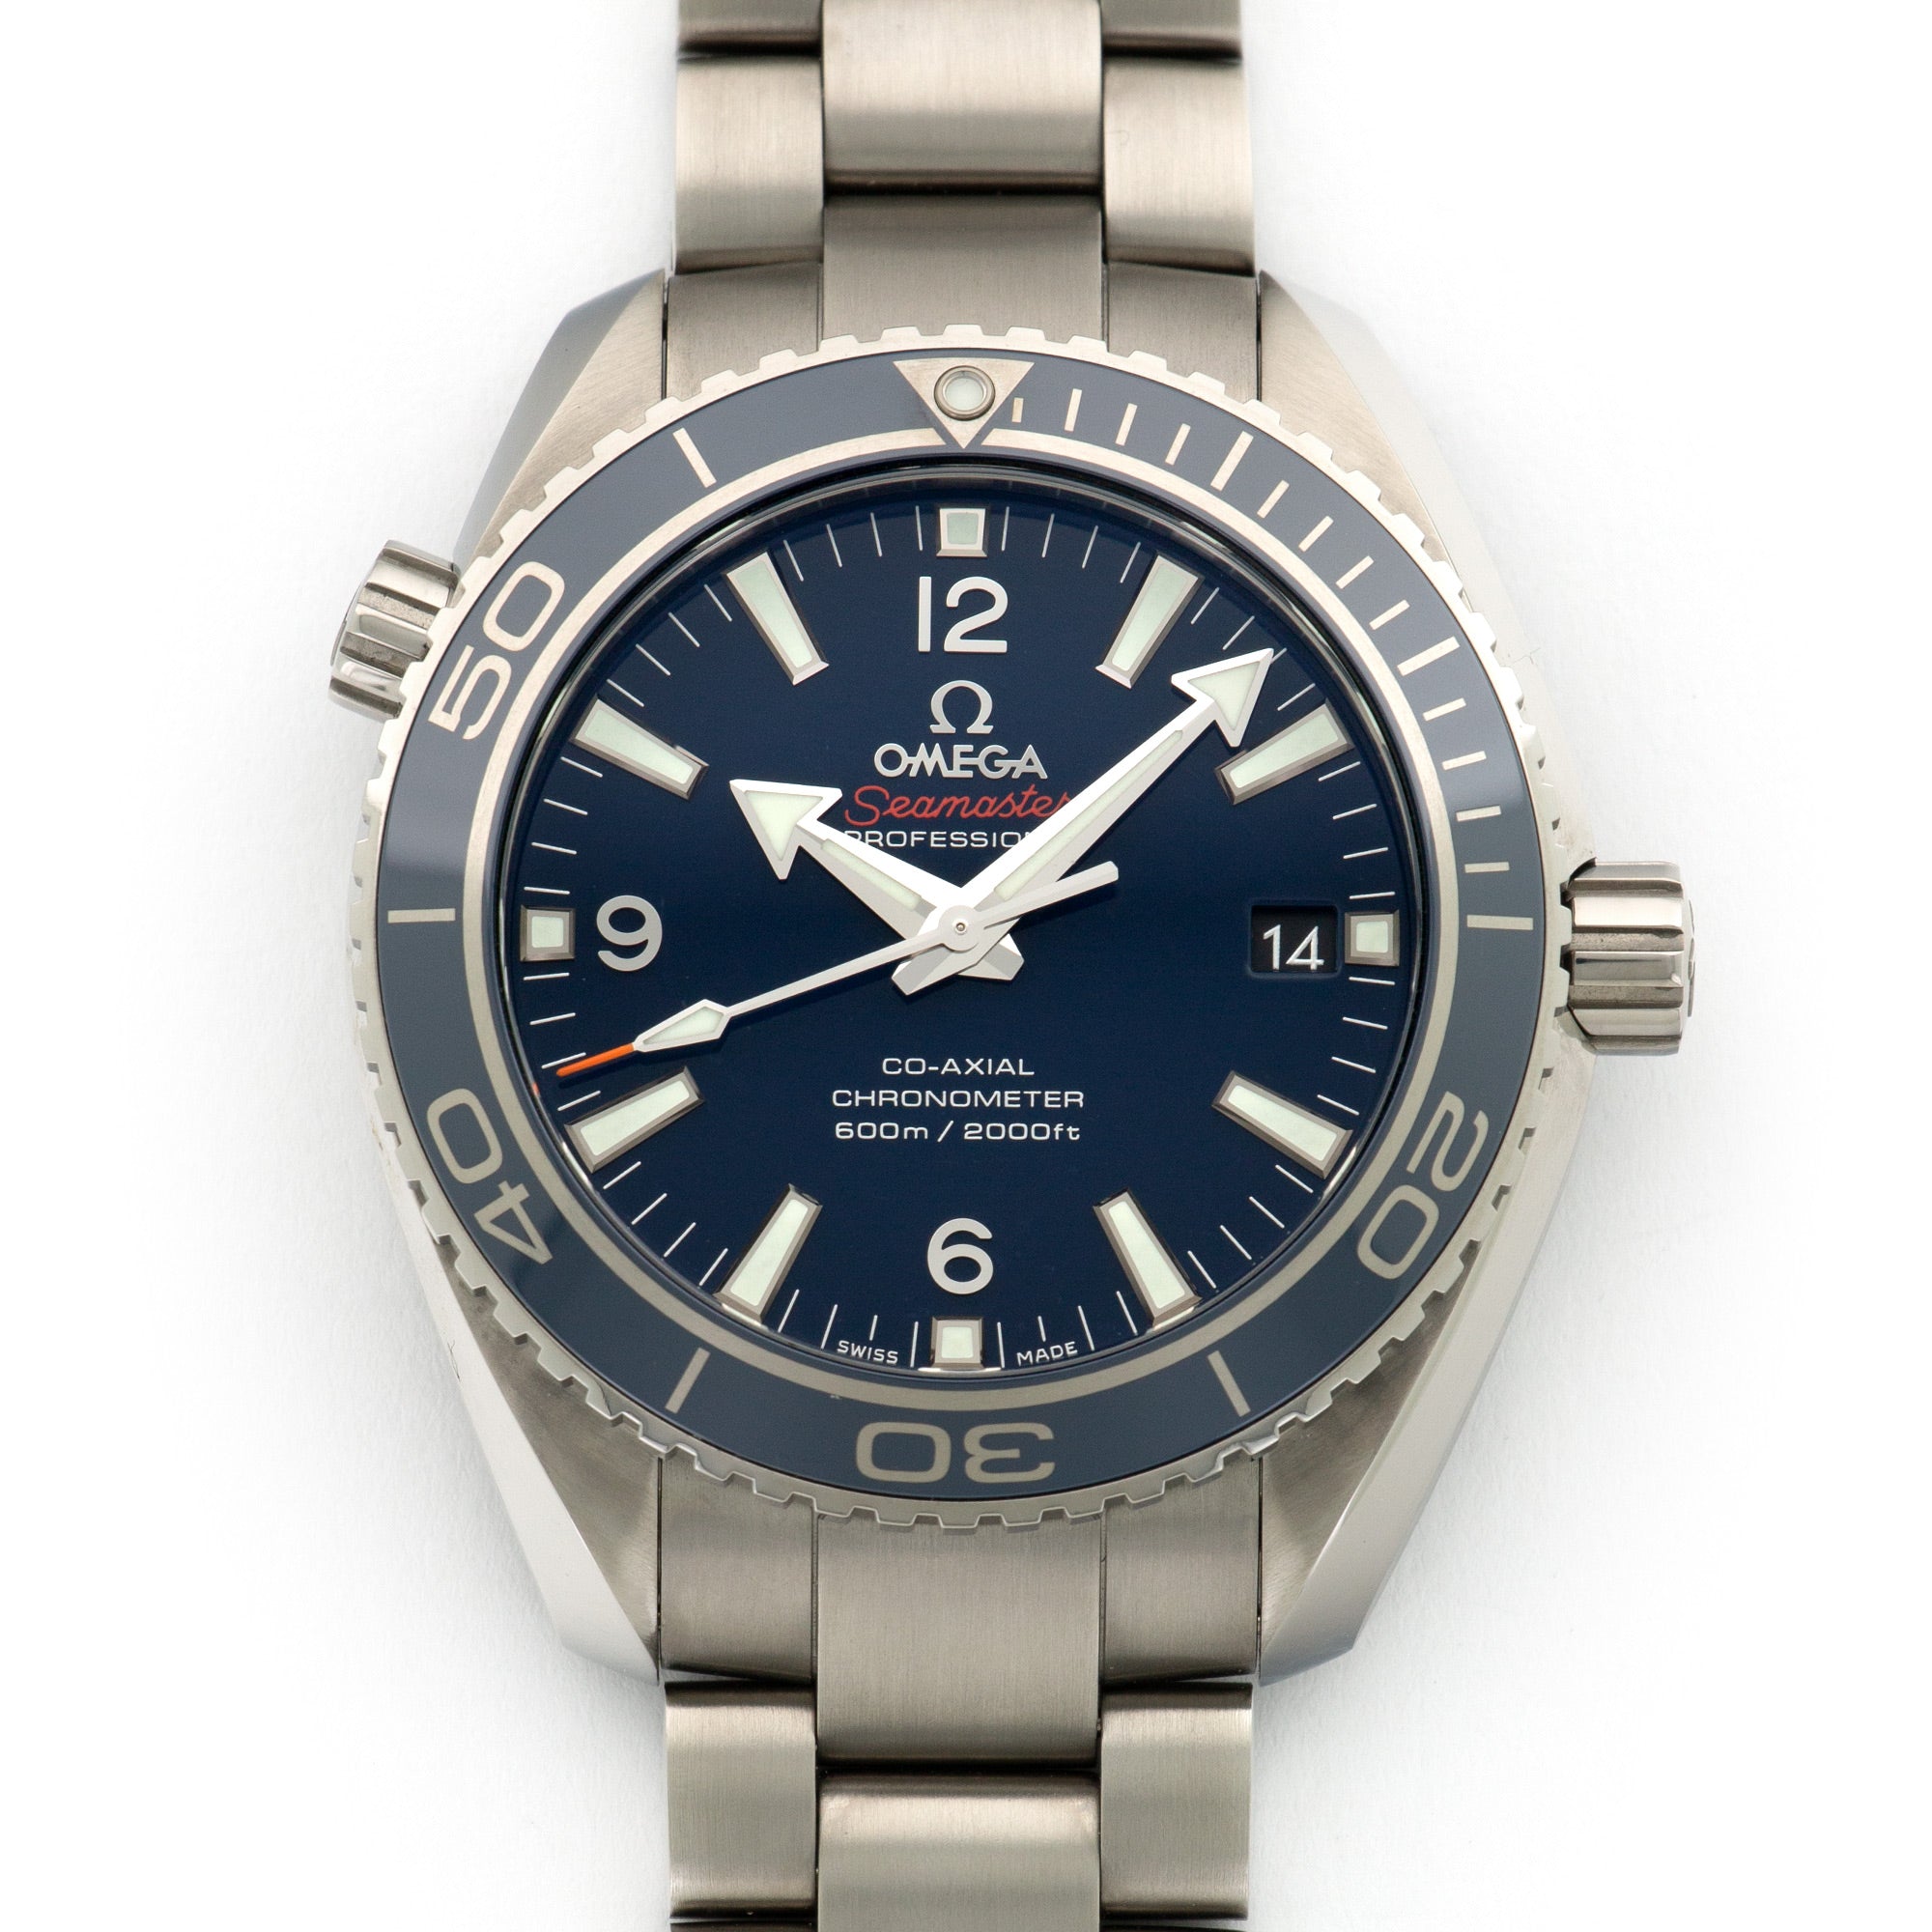 Omega - Omega Titanium Seamaster Planet Ocean Co-Axial Watch - The Keystone Watches